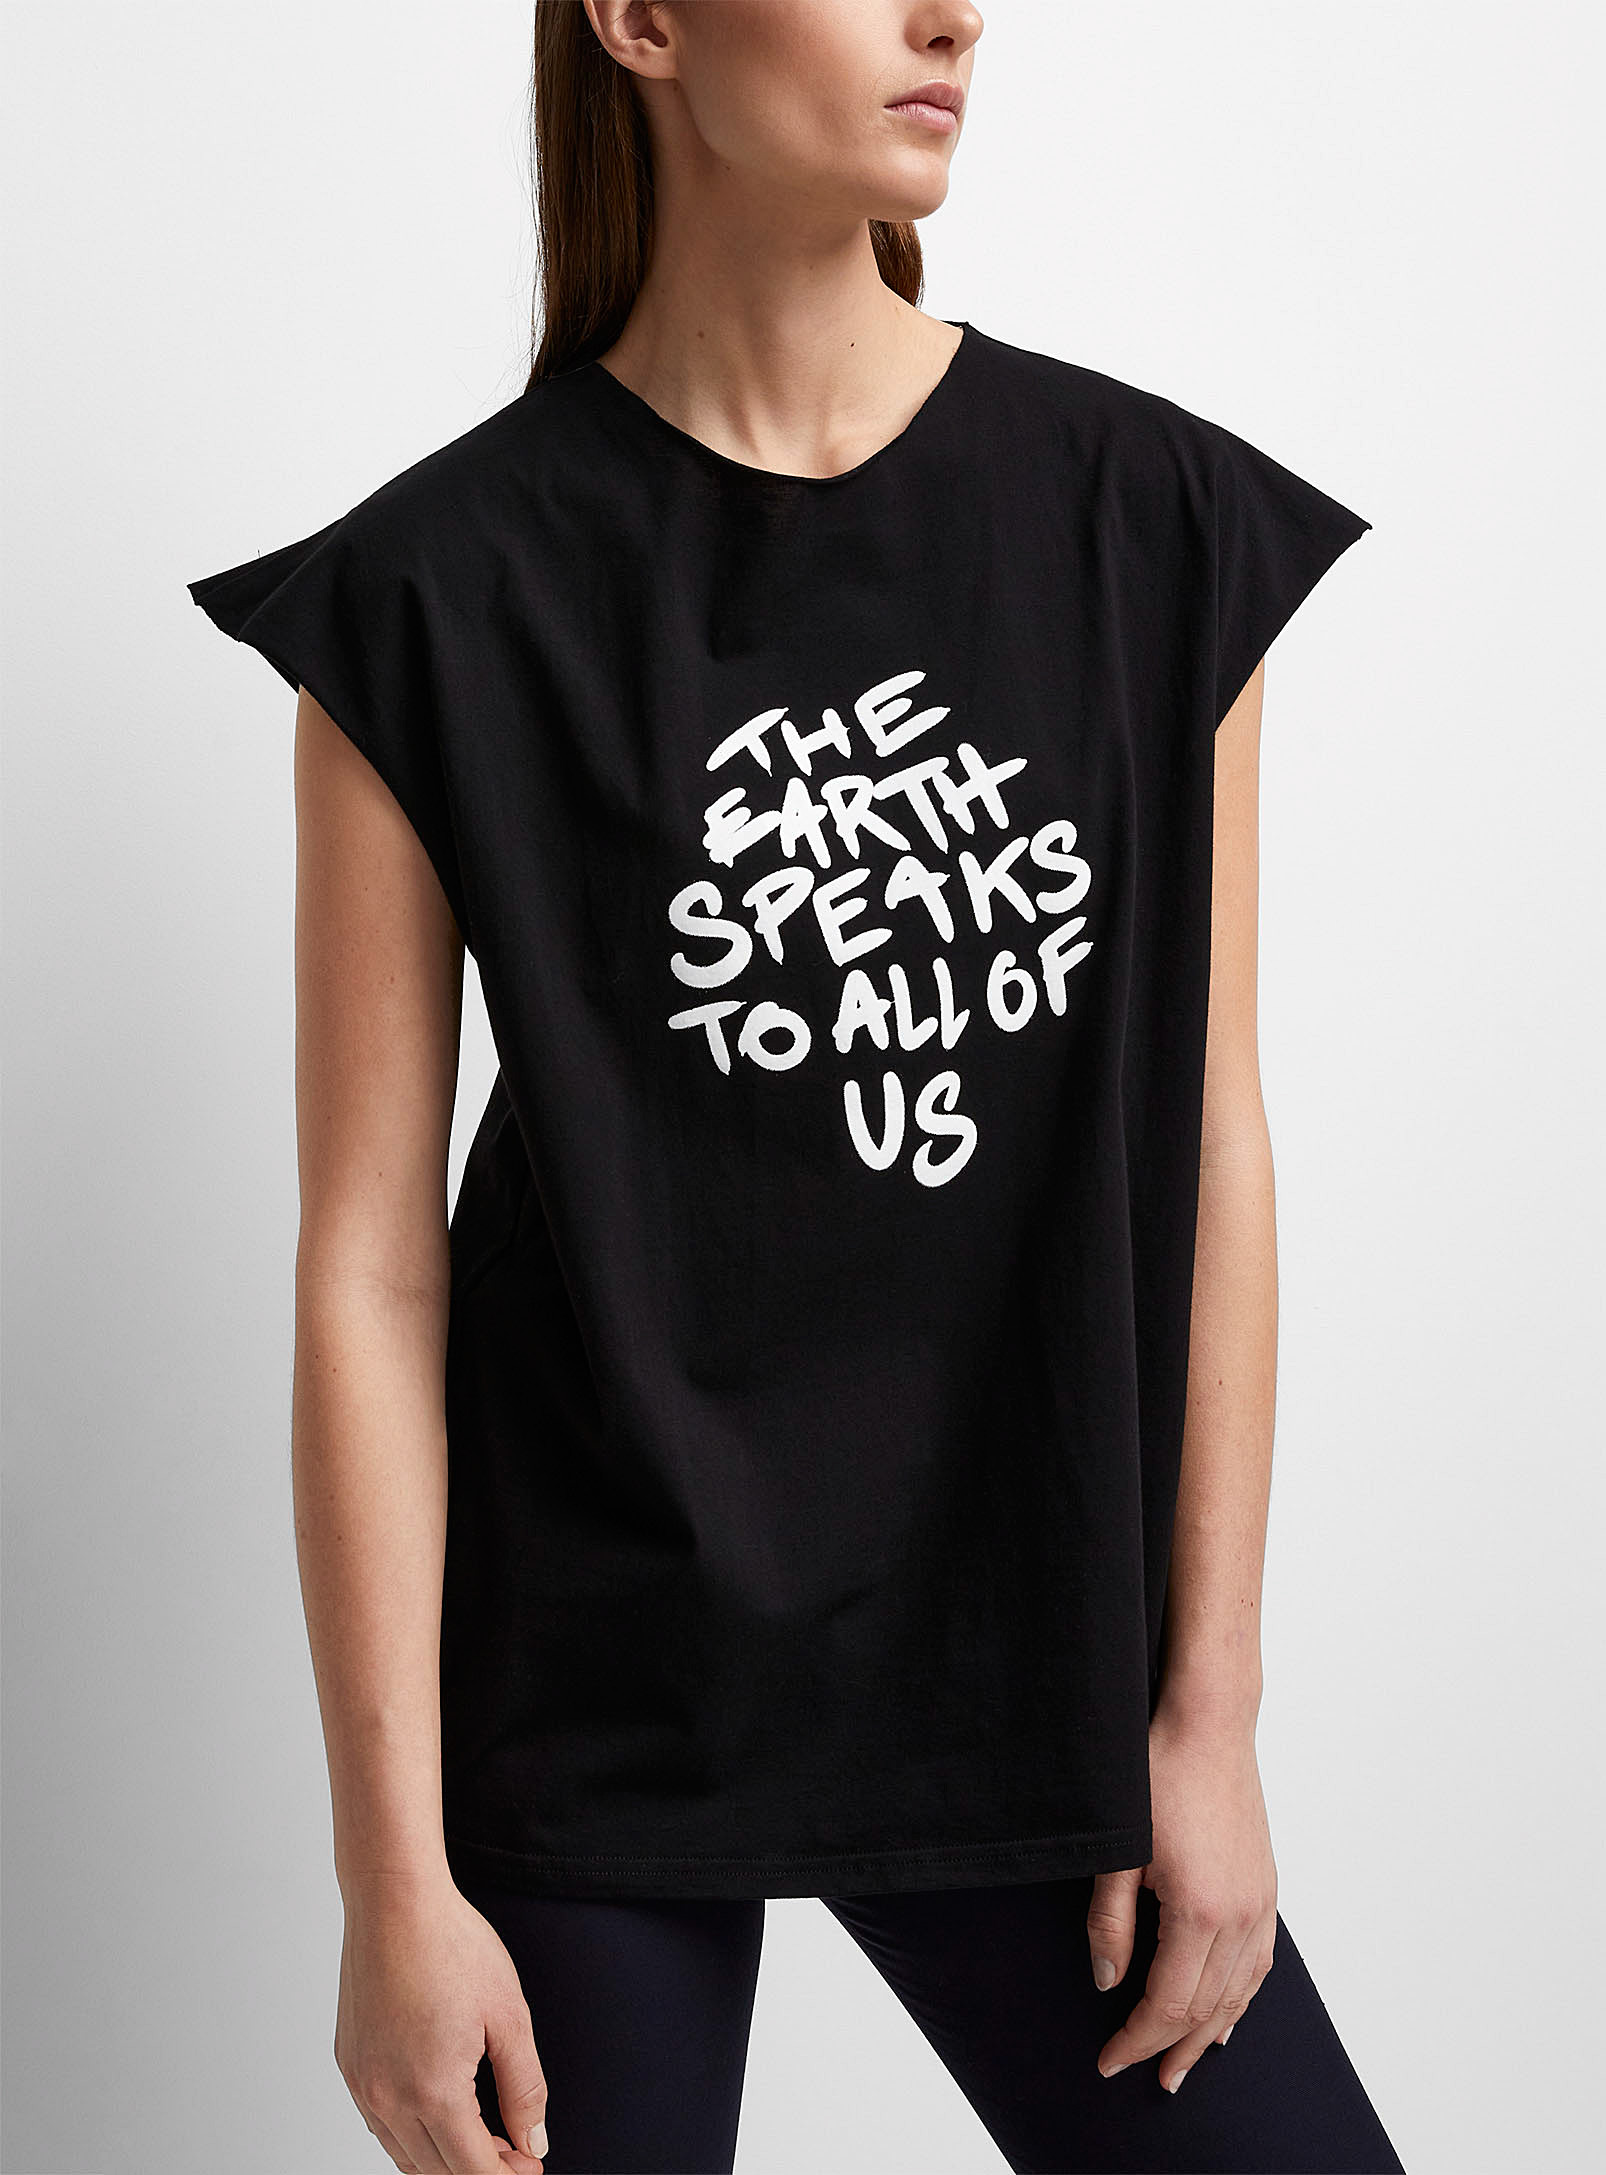 Jeanne Friot - Women's The Earth Speaks To All of Us T-shirt